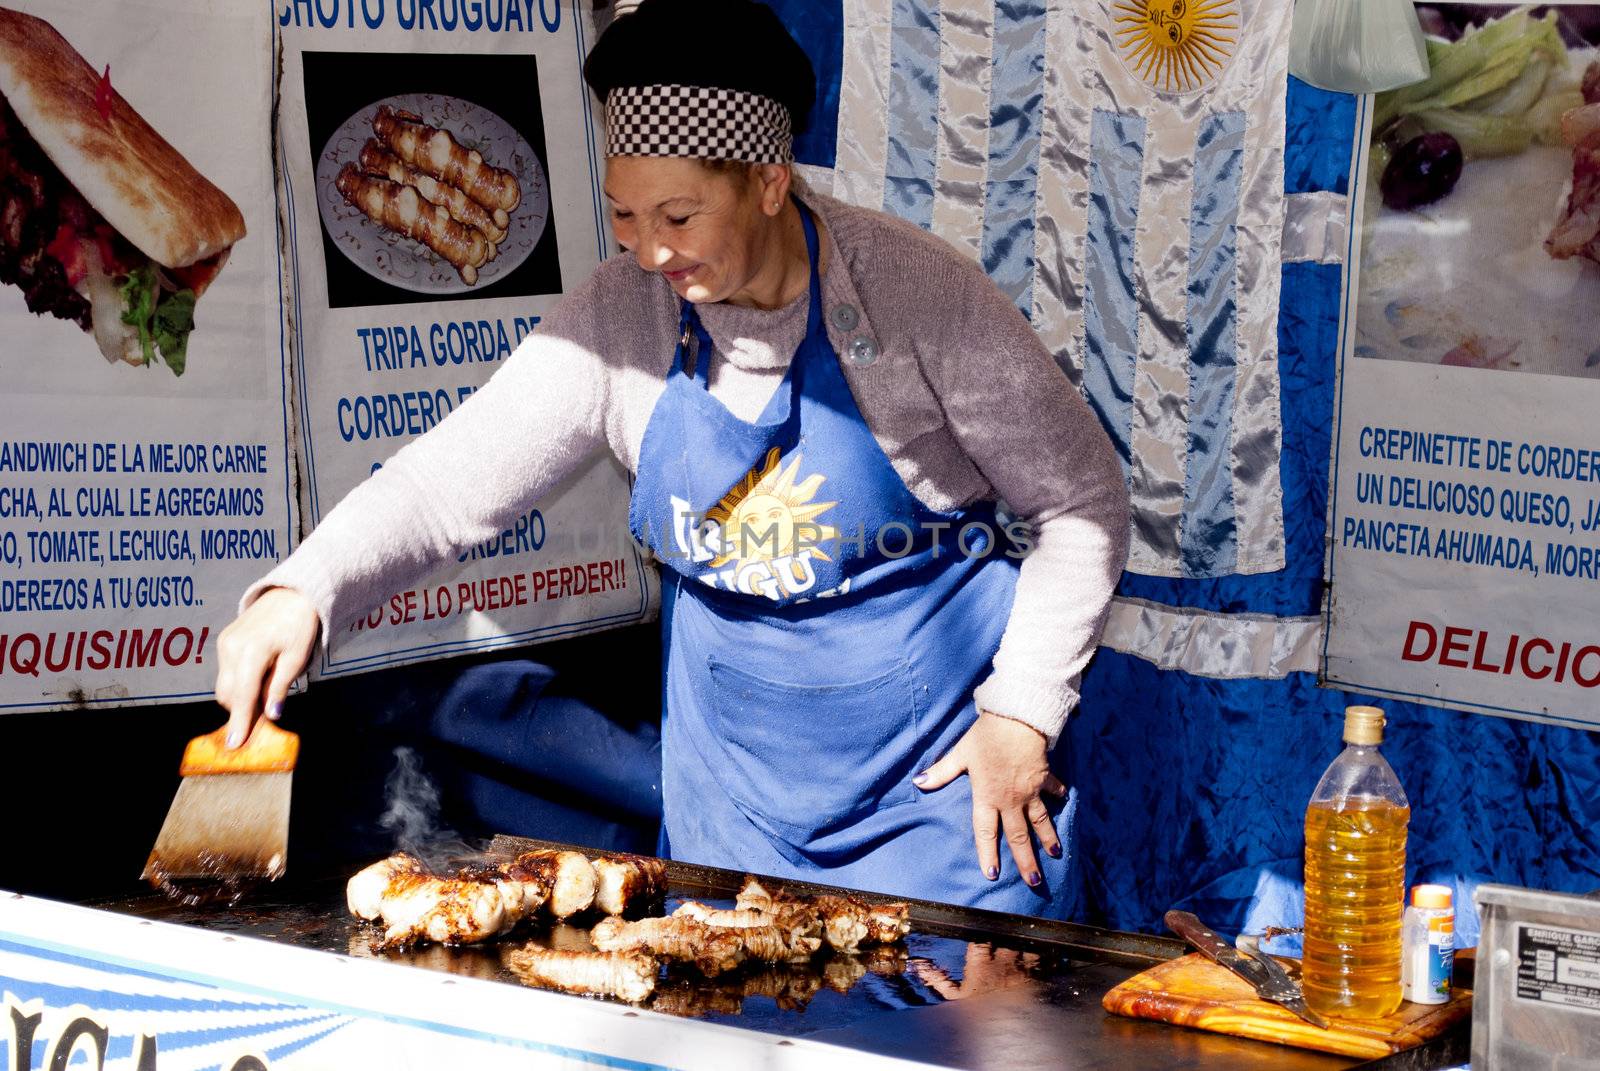 Buenos Aires, Argentina - May 12, 2012, Woman cooking typical food in Uruguay's booth at the fair organized nations in the city of San Fernando, Province of Buenos Aires